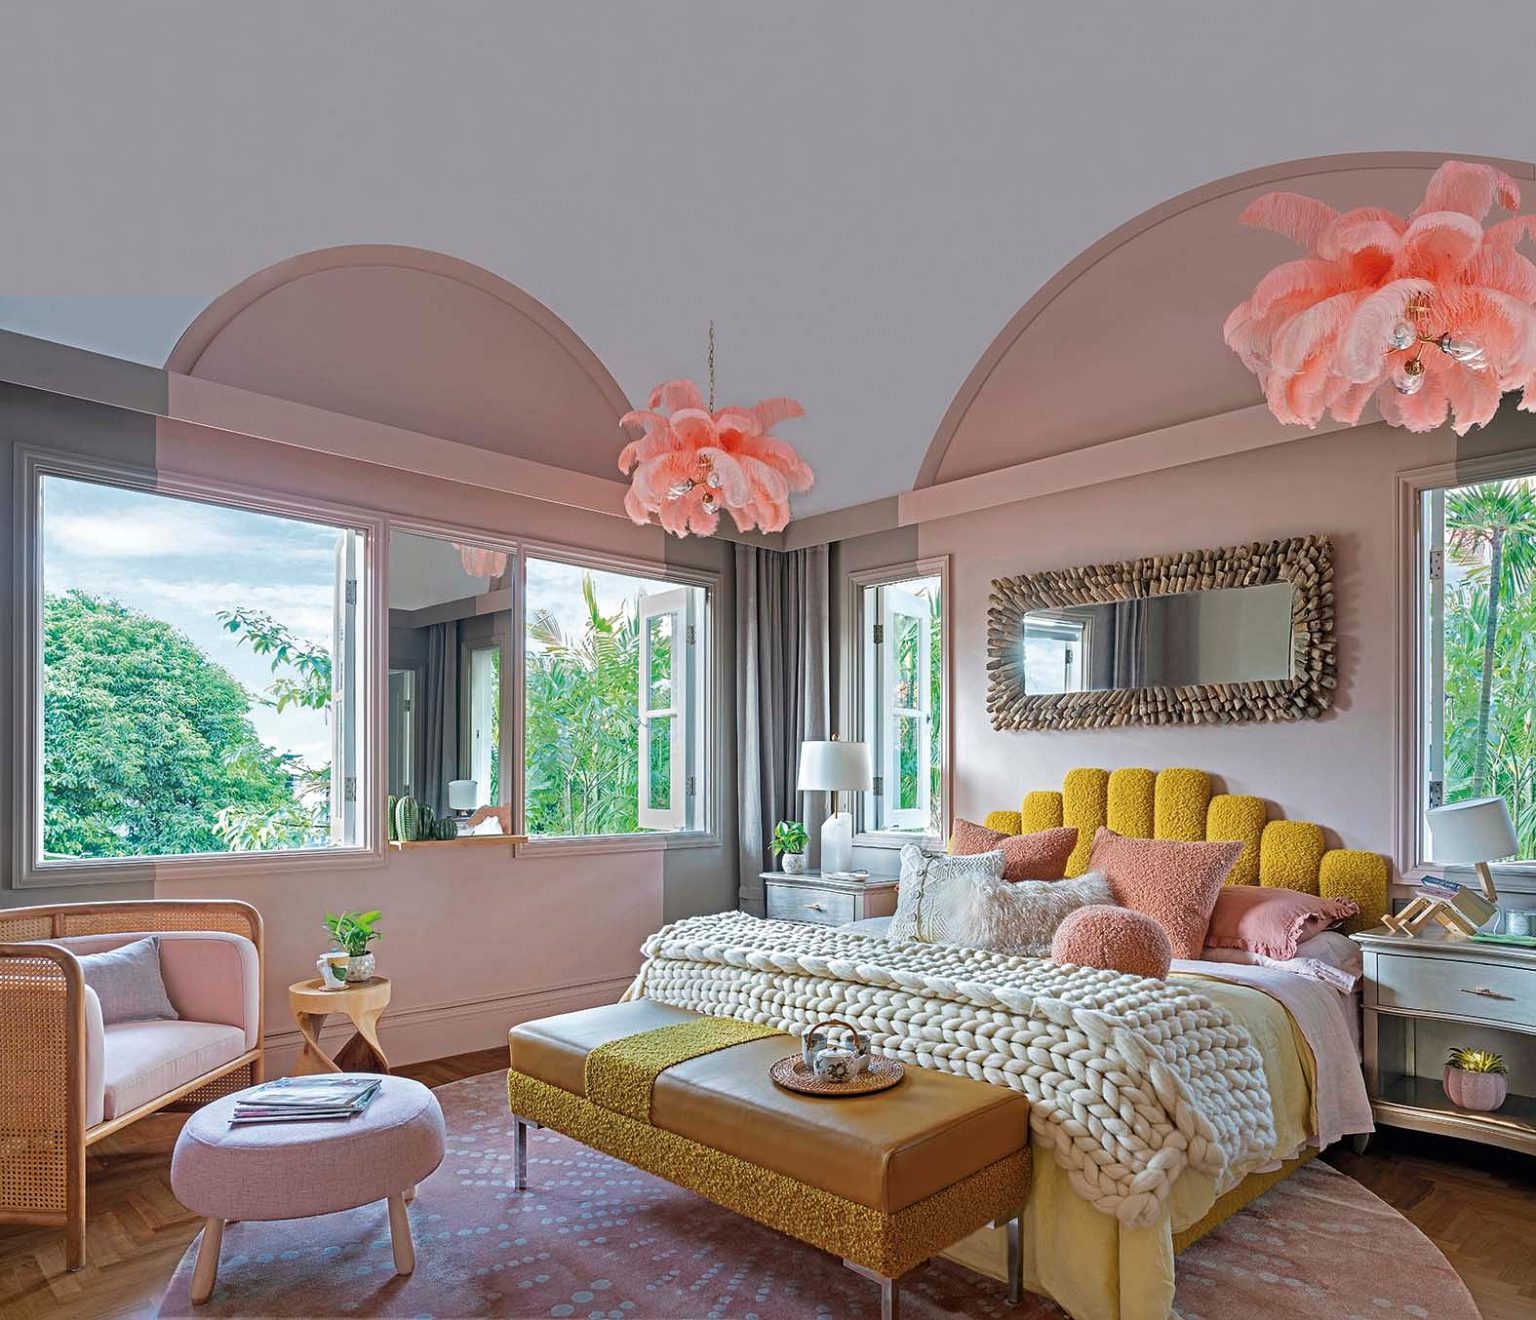 The contrasting shades of pink, grey and mustard in this bedroom, designed by Nikki Hunt of Design Intervention, help to make the space cosy and warm.